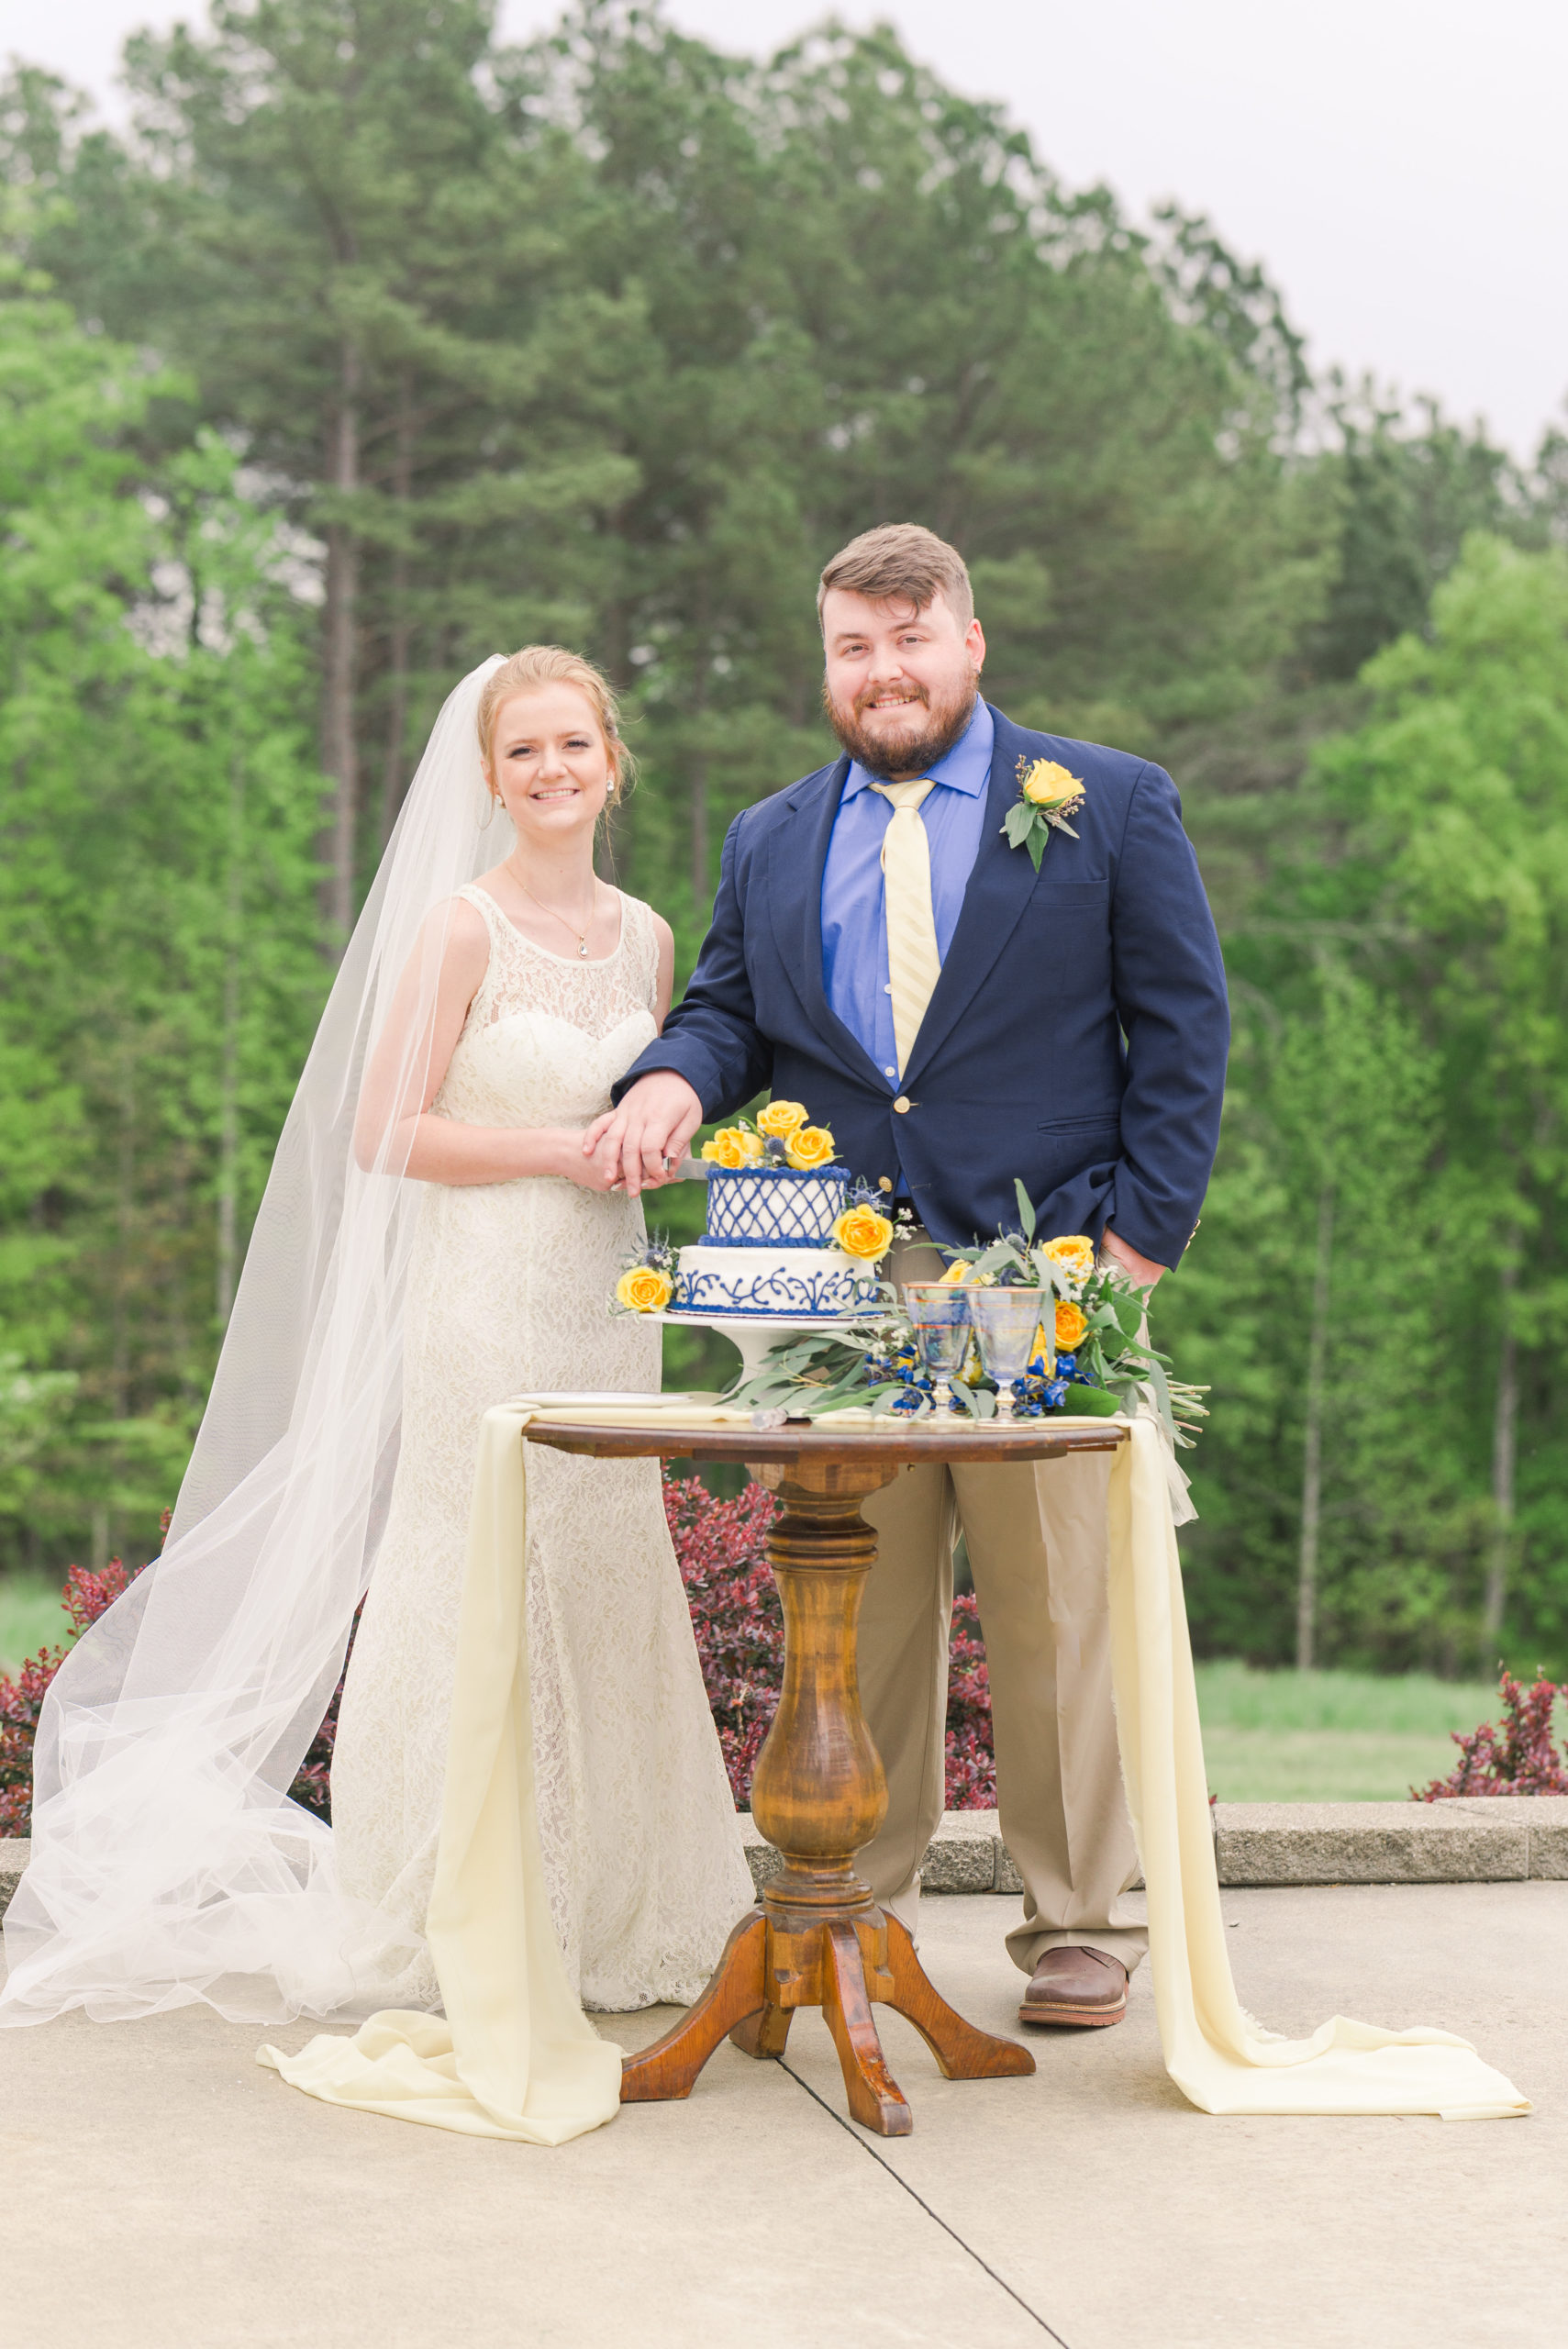 Bride and groom getting ready to cut wedding cake for styled shoot - Blue and yellow color scheme